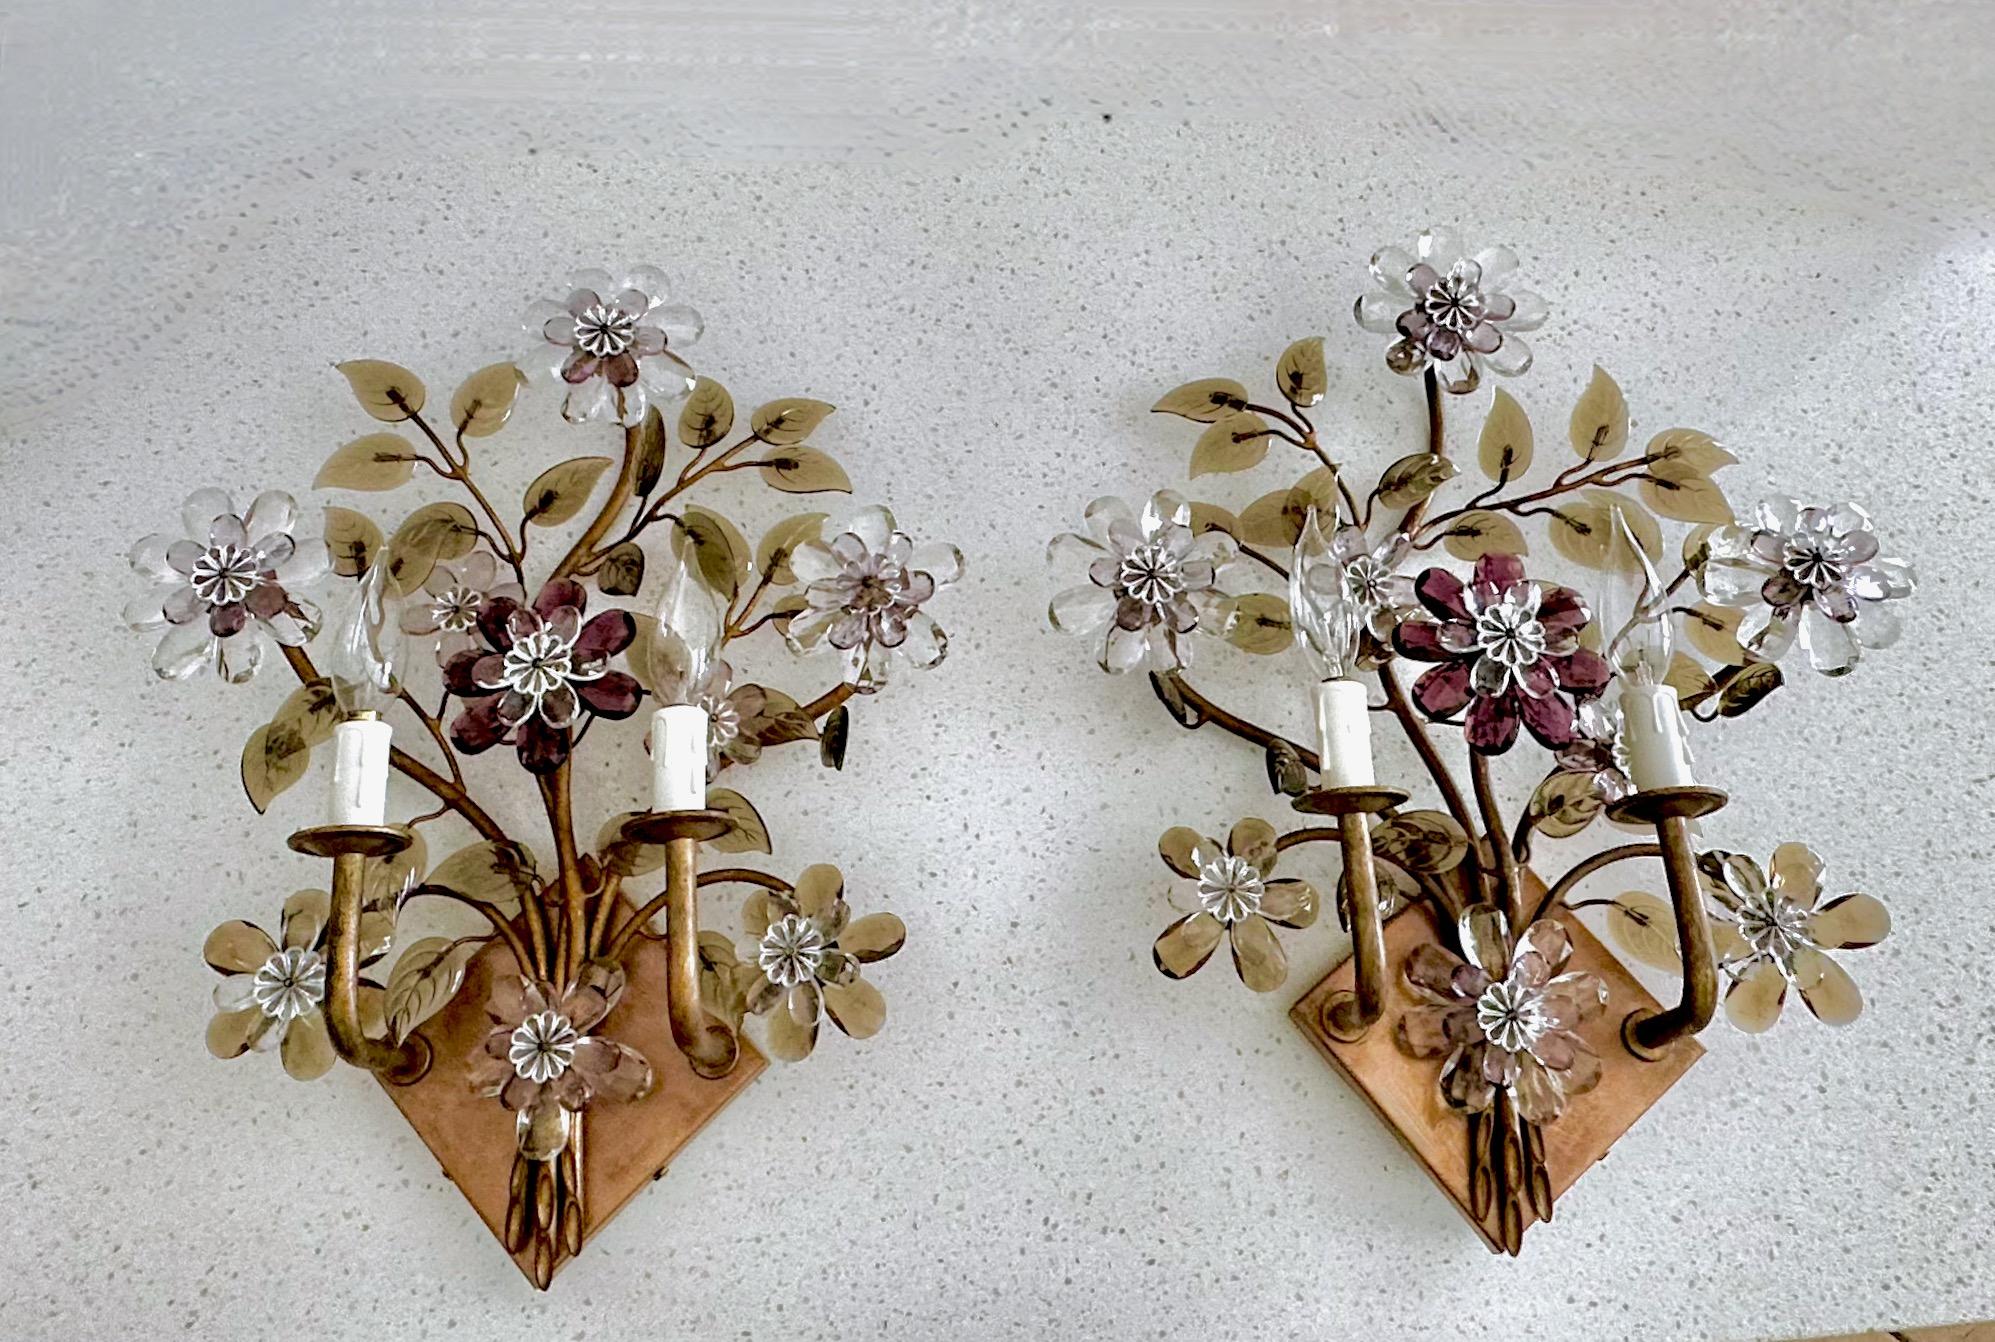 Pair two-light wall sconces designed by Oswald Haerdtl for J.L Lobmeyr. The patinated brass structure is welded to create the delicate organic branches. These are decorated with clear, purple and smoked crystals creating a bouquet of blossoms and